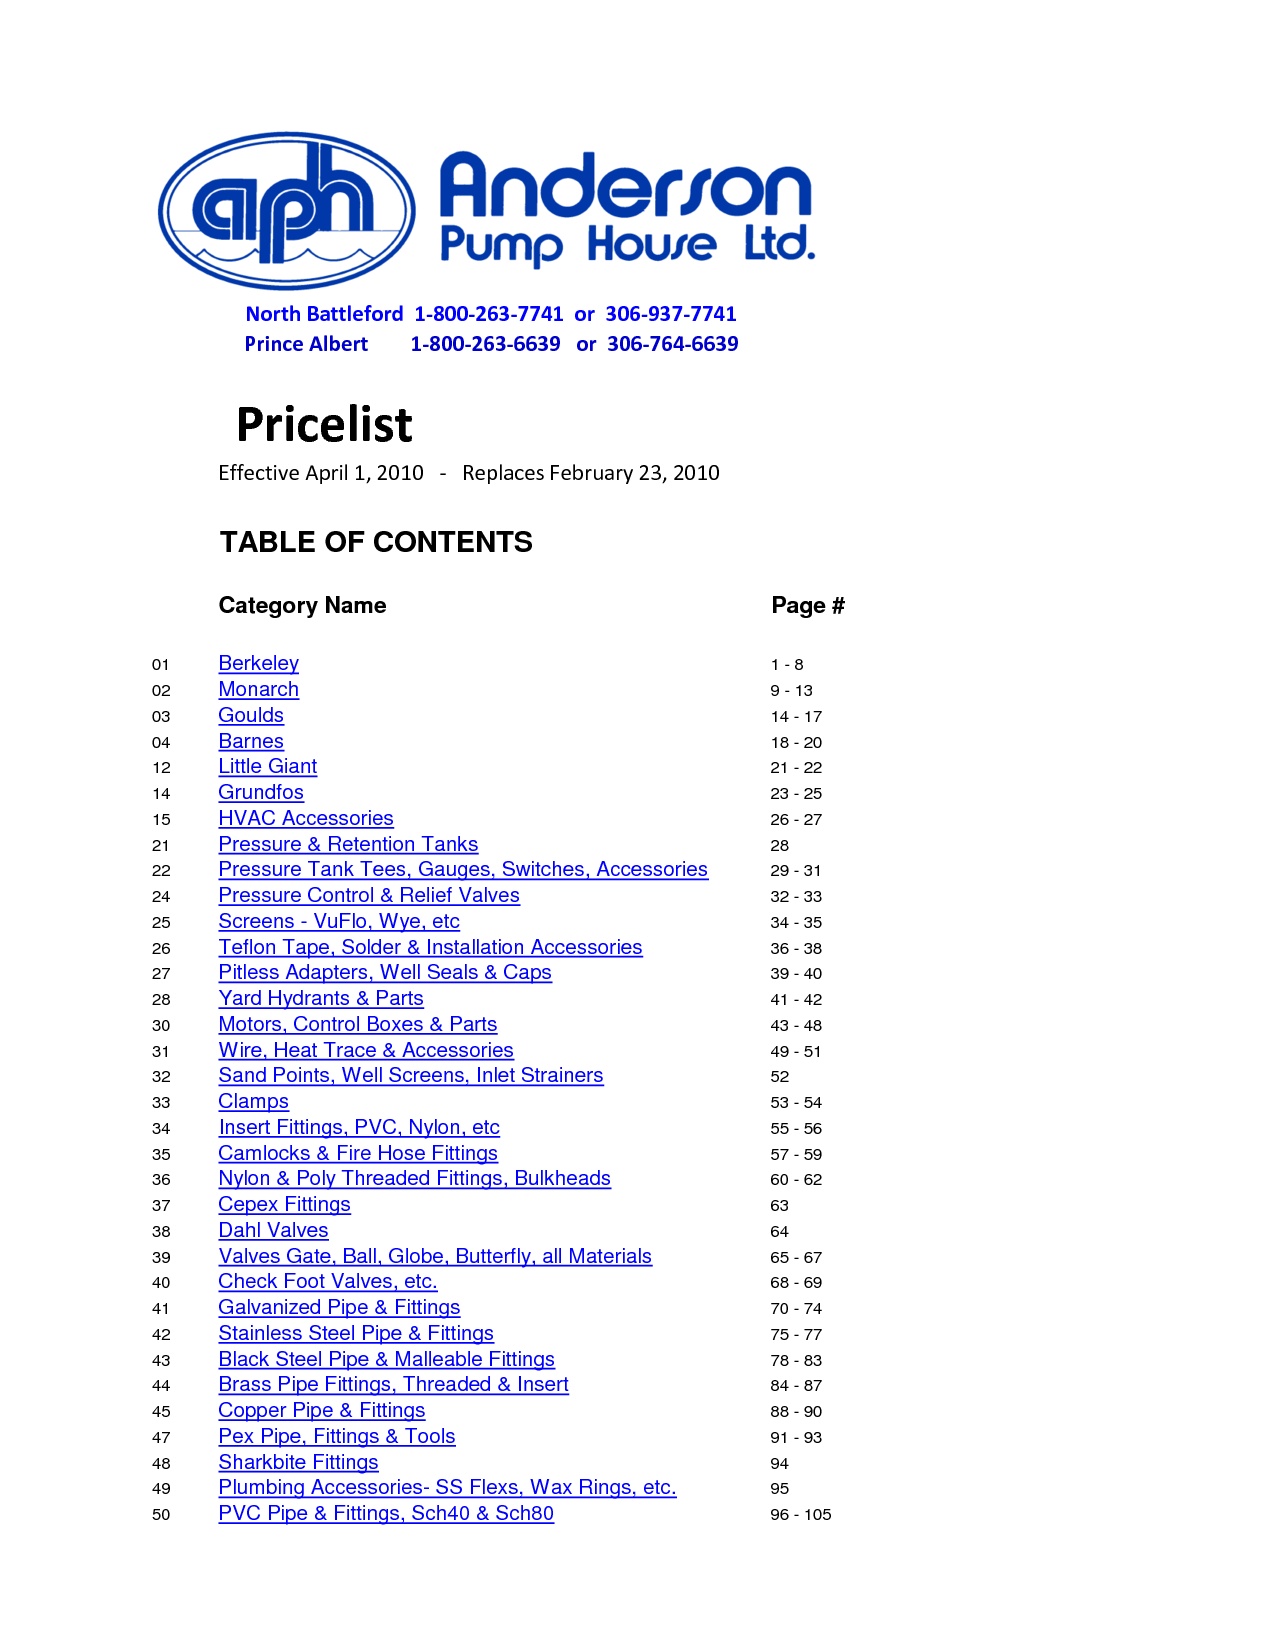 Table of Contents - Anderson Pump House Ltd